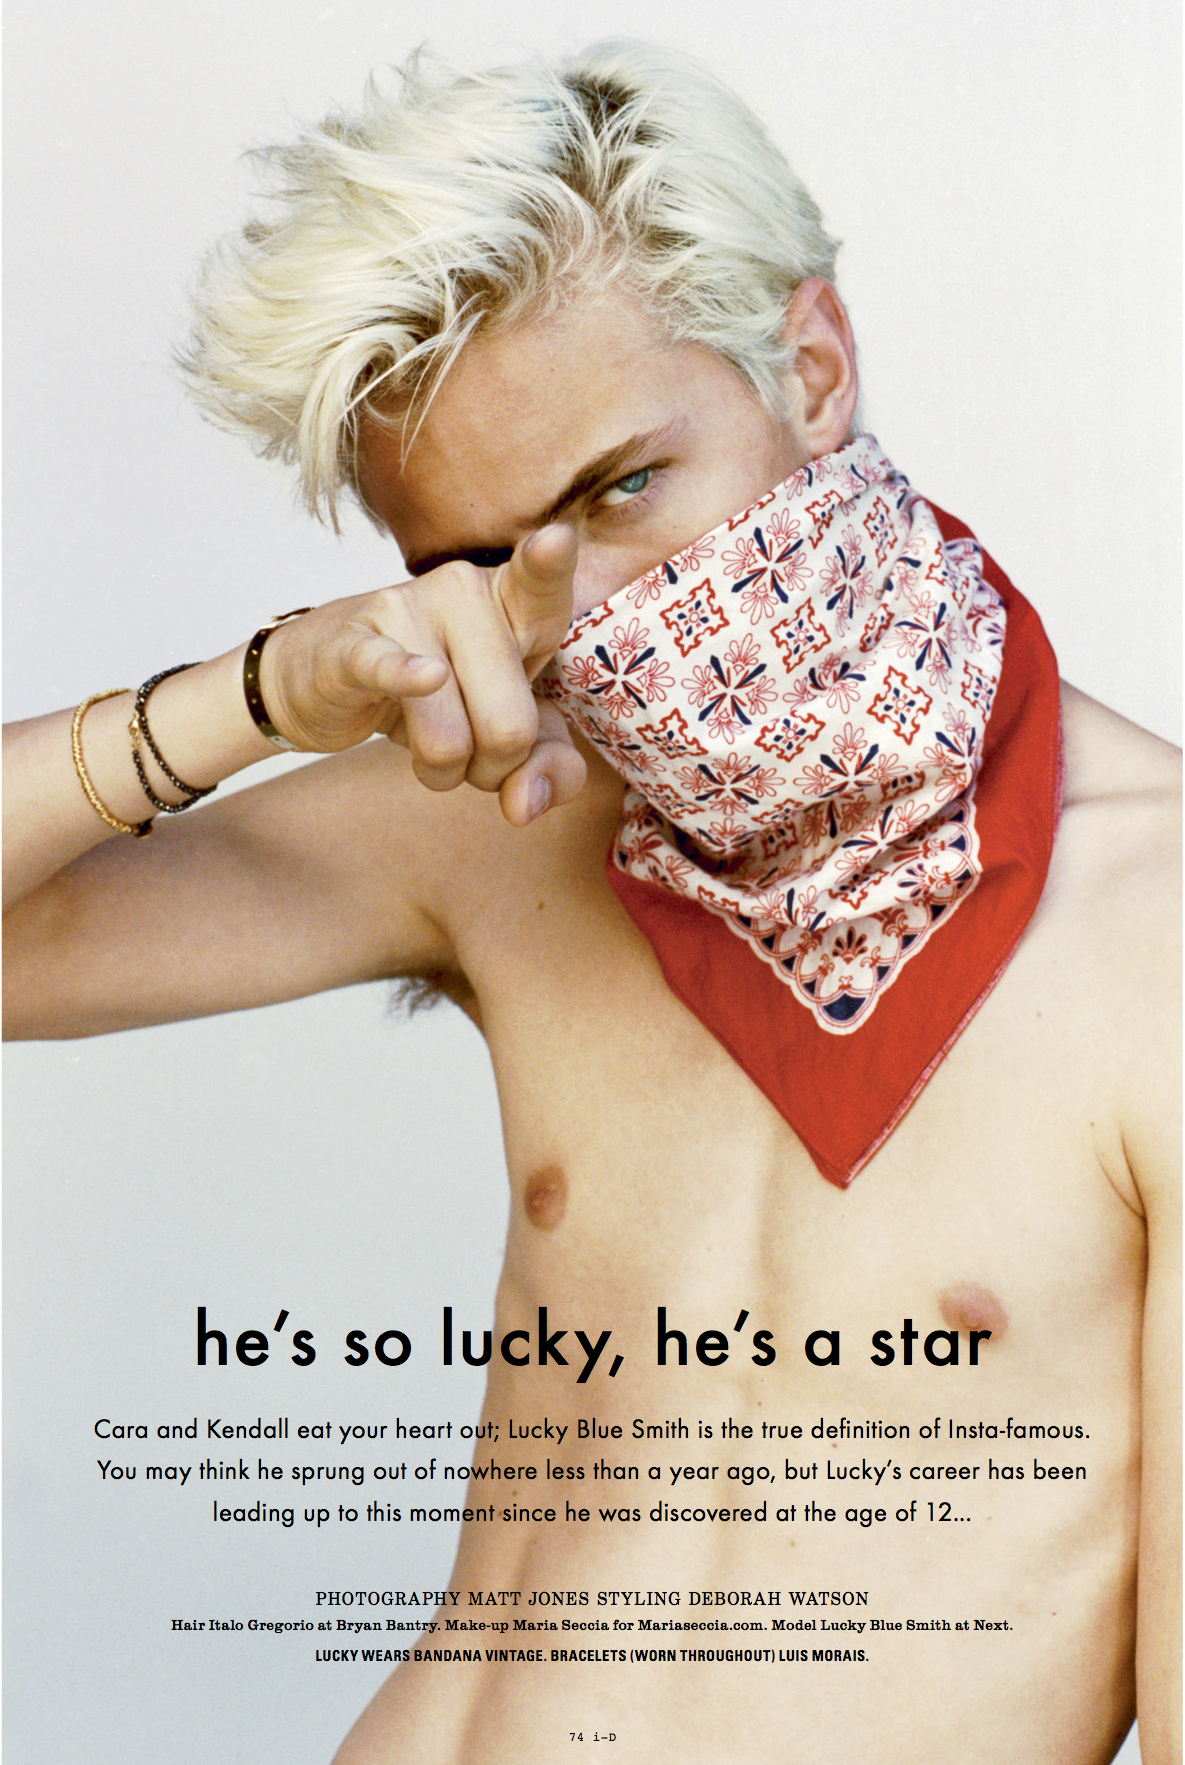 Lucky Blue Smith Charms in Casual i-D Shoot